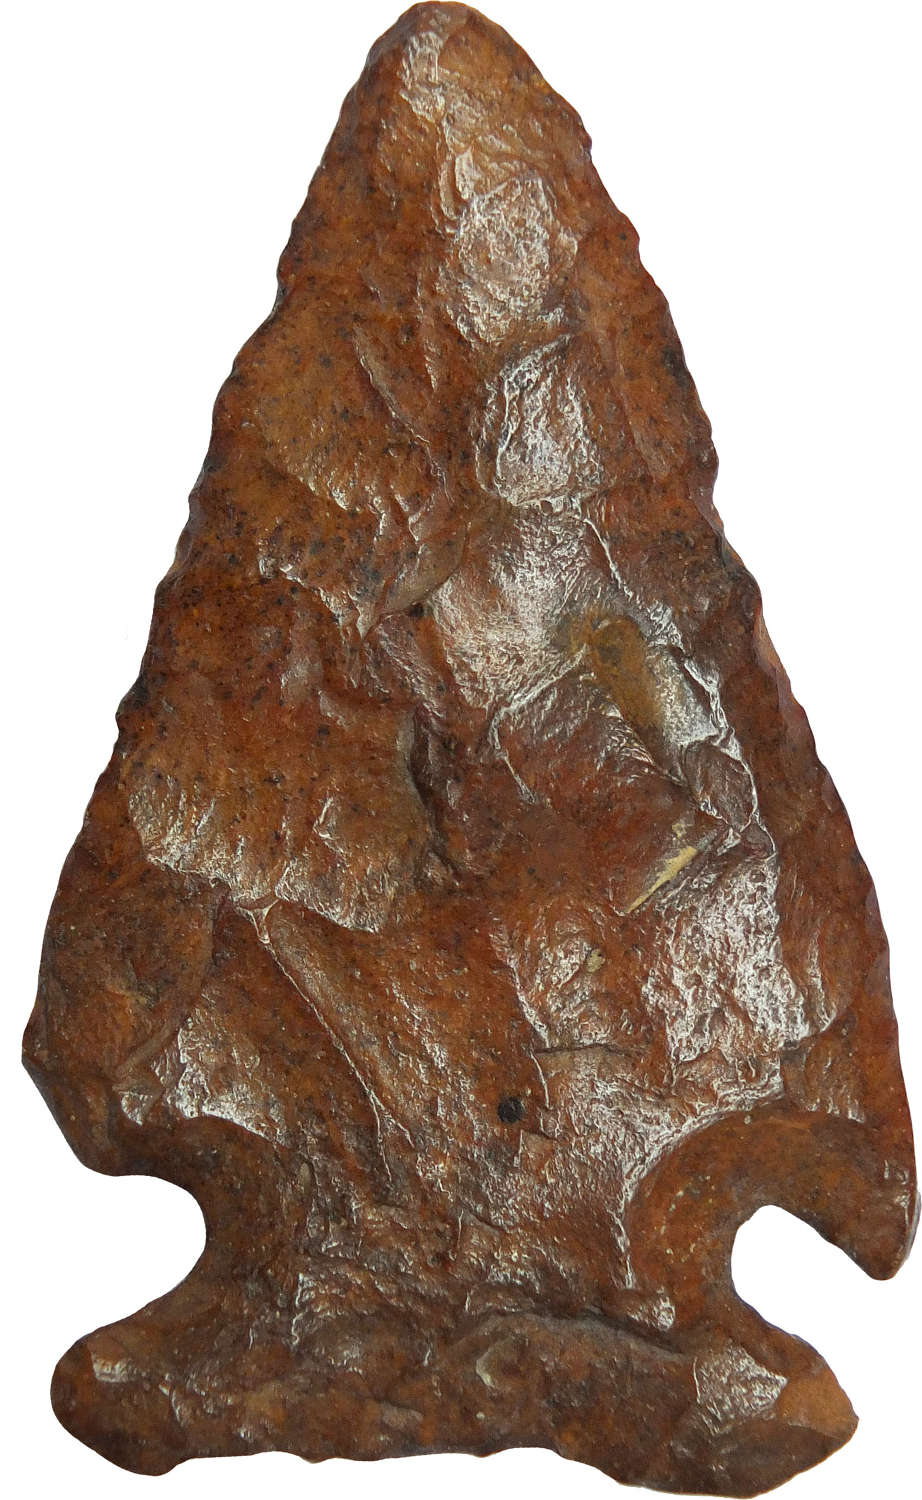 A North American Indian Archaic flint side notched point